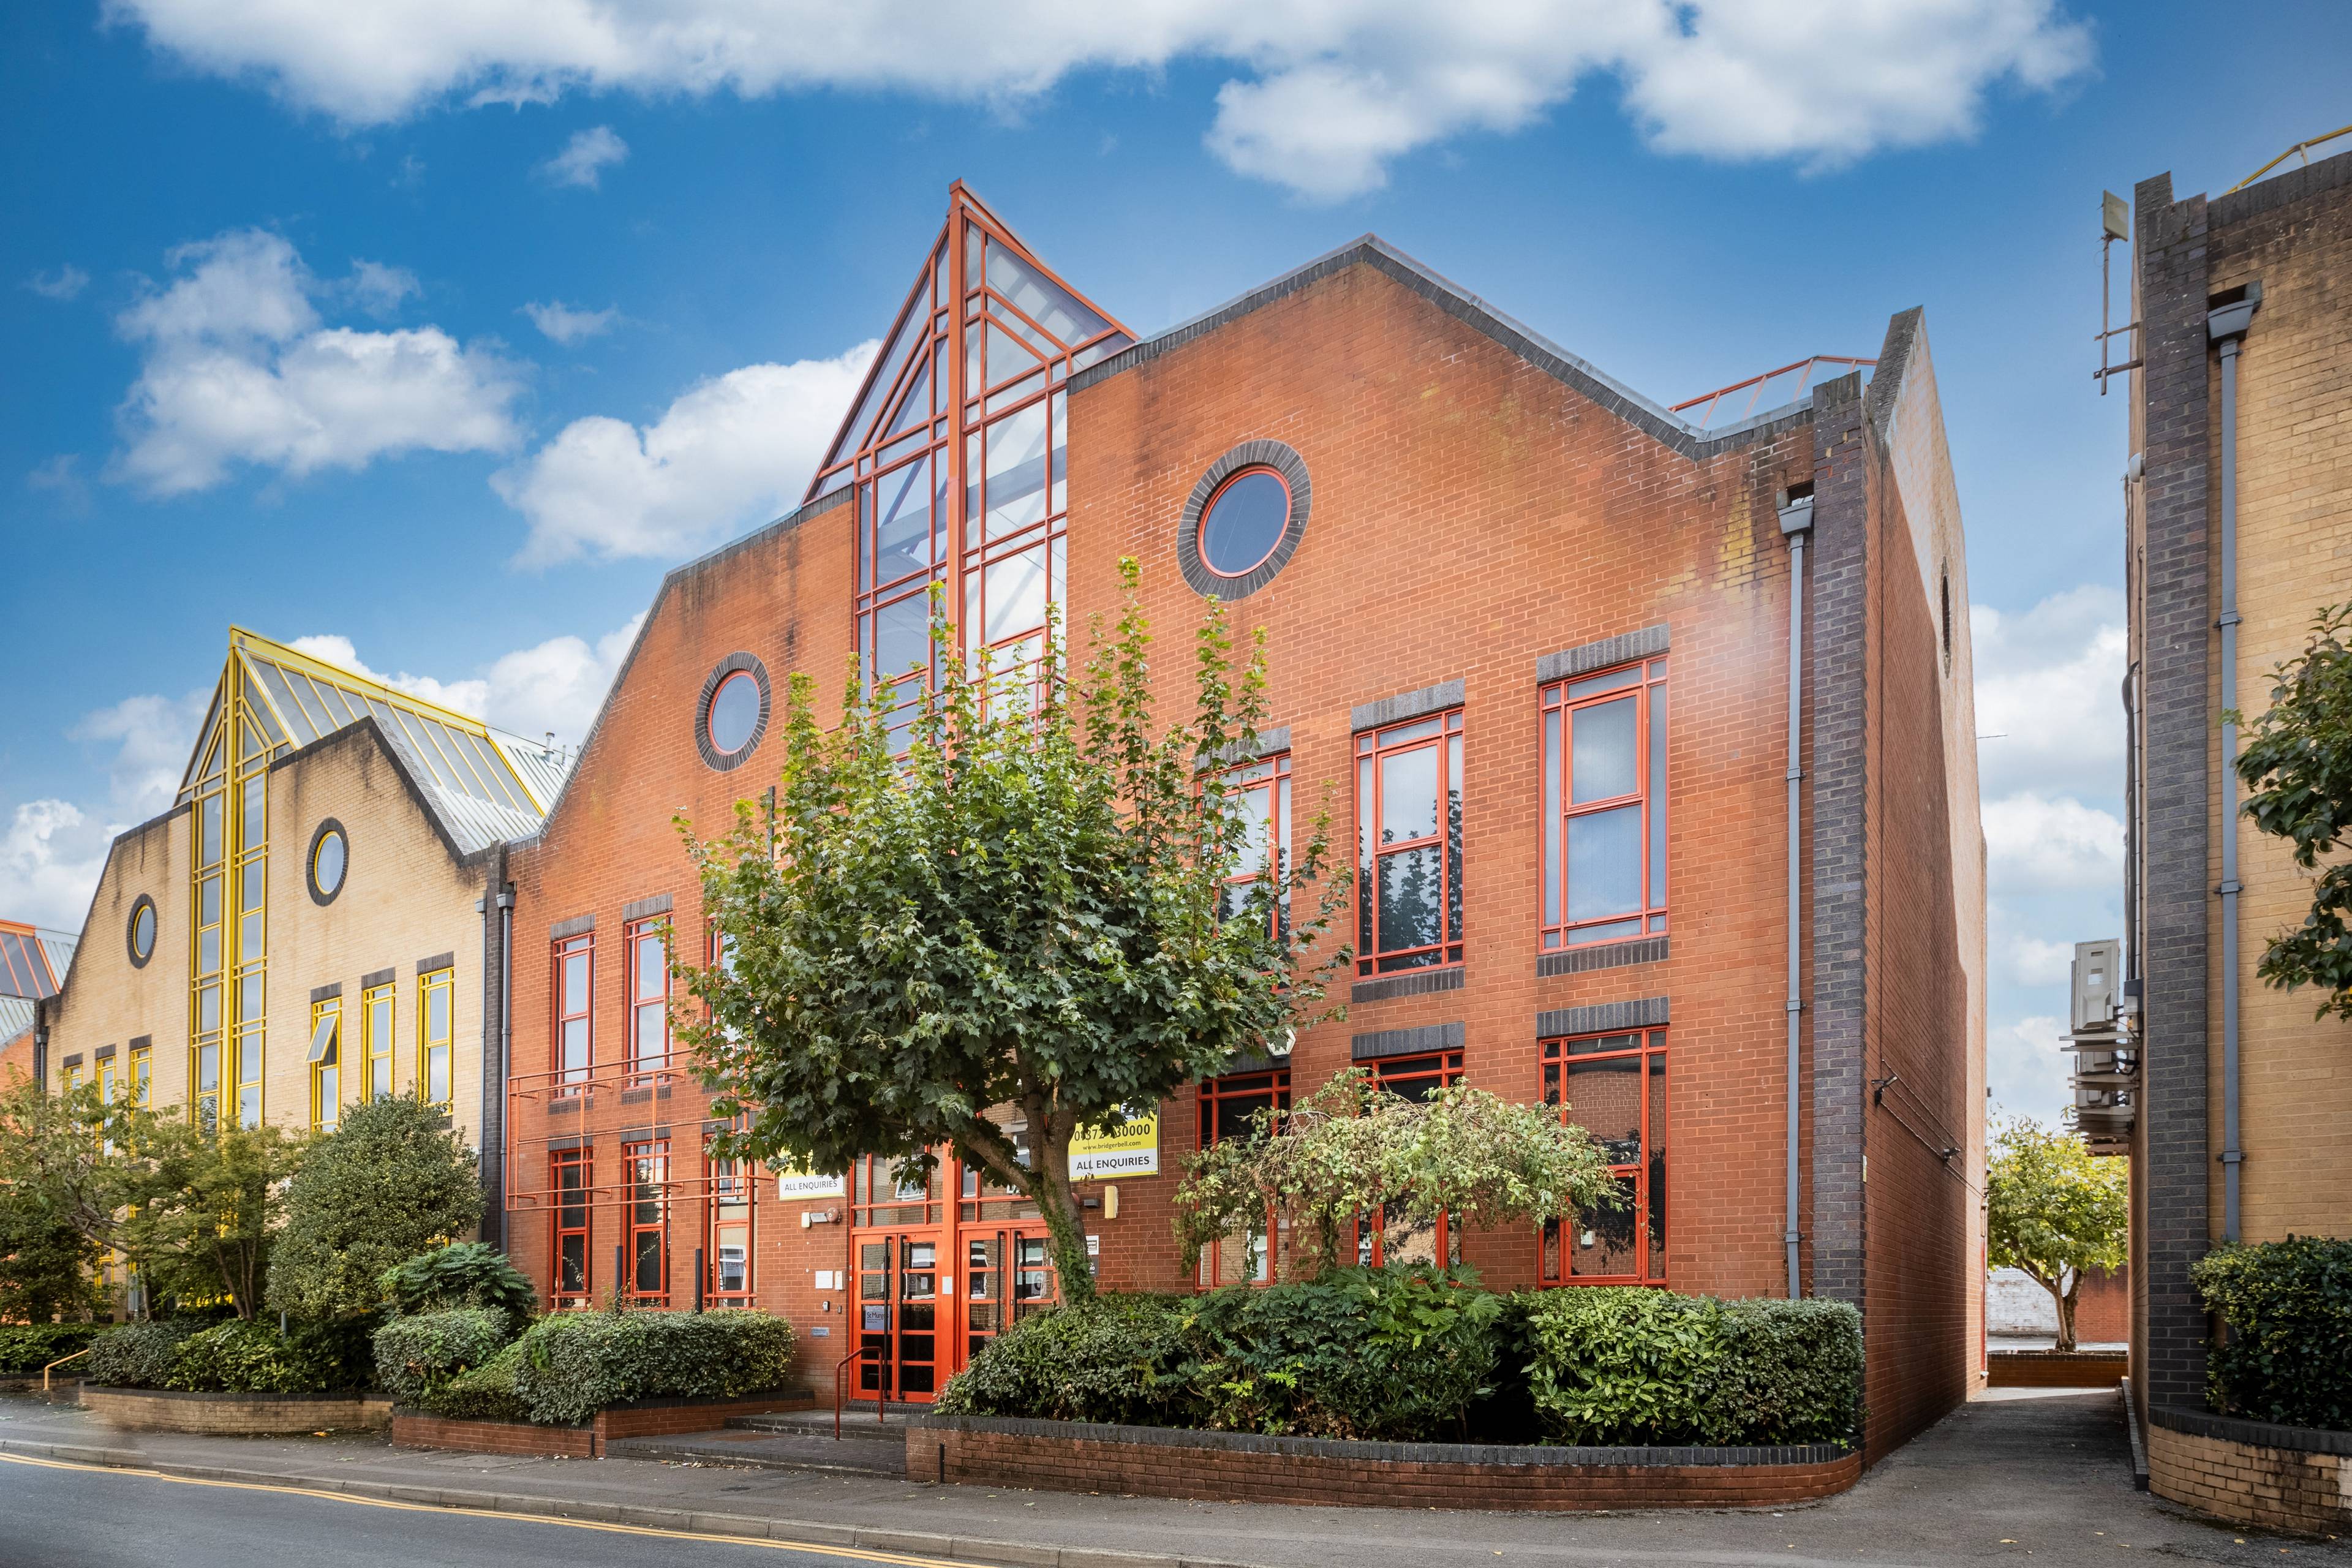 Adjoining Office Buildings, Three Storey, Located On South Street Reading Town Centre